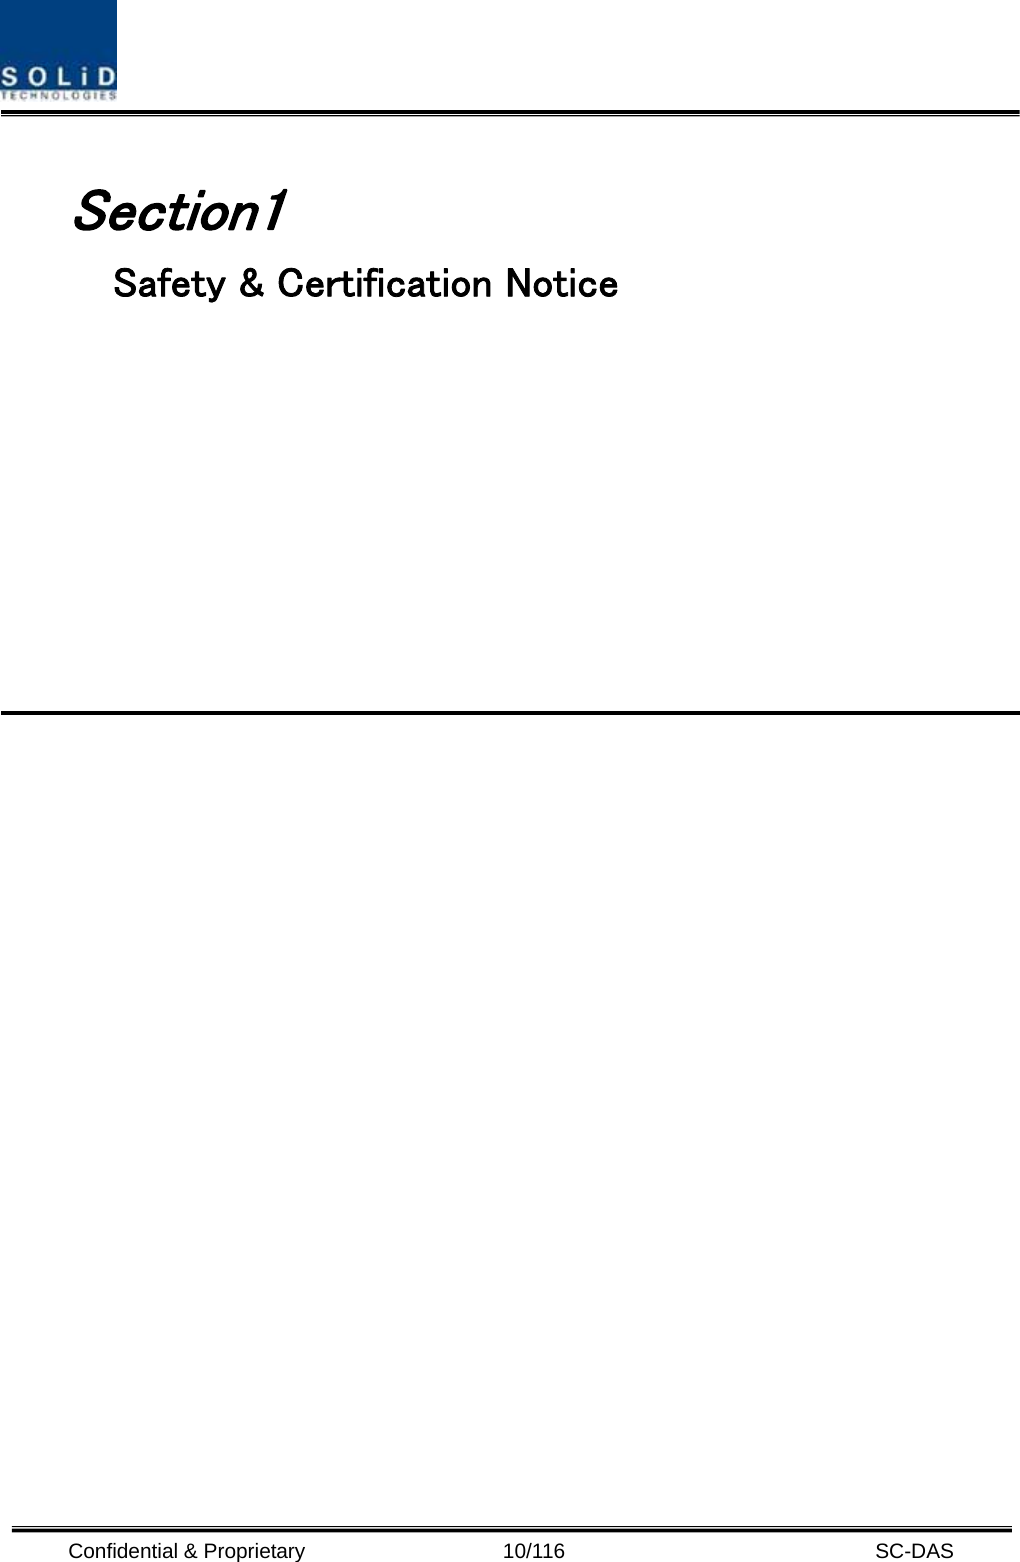  Confidential &amp; Proprietary                   10/116   SC-DAS  Section1                                 Safety &amp; Certification Notice                                